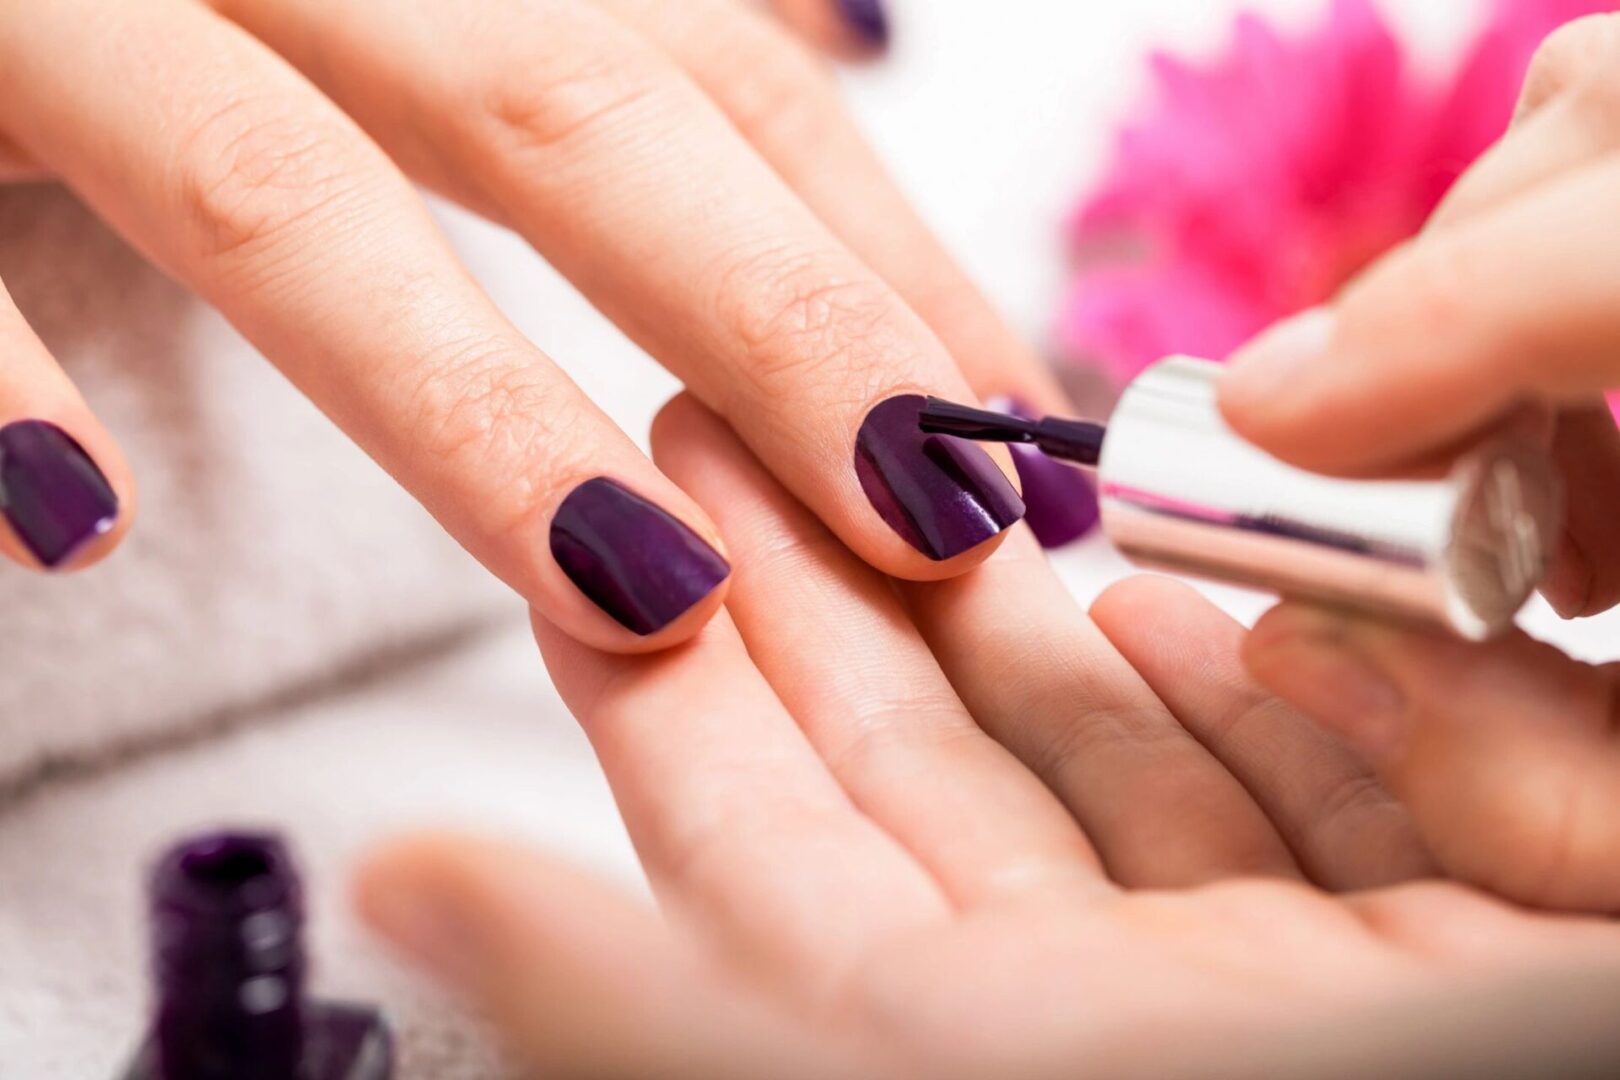 A person is painting their nails purple